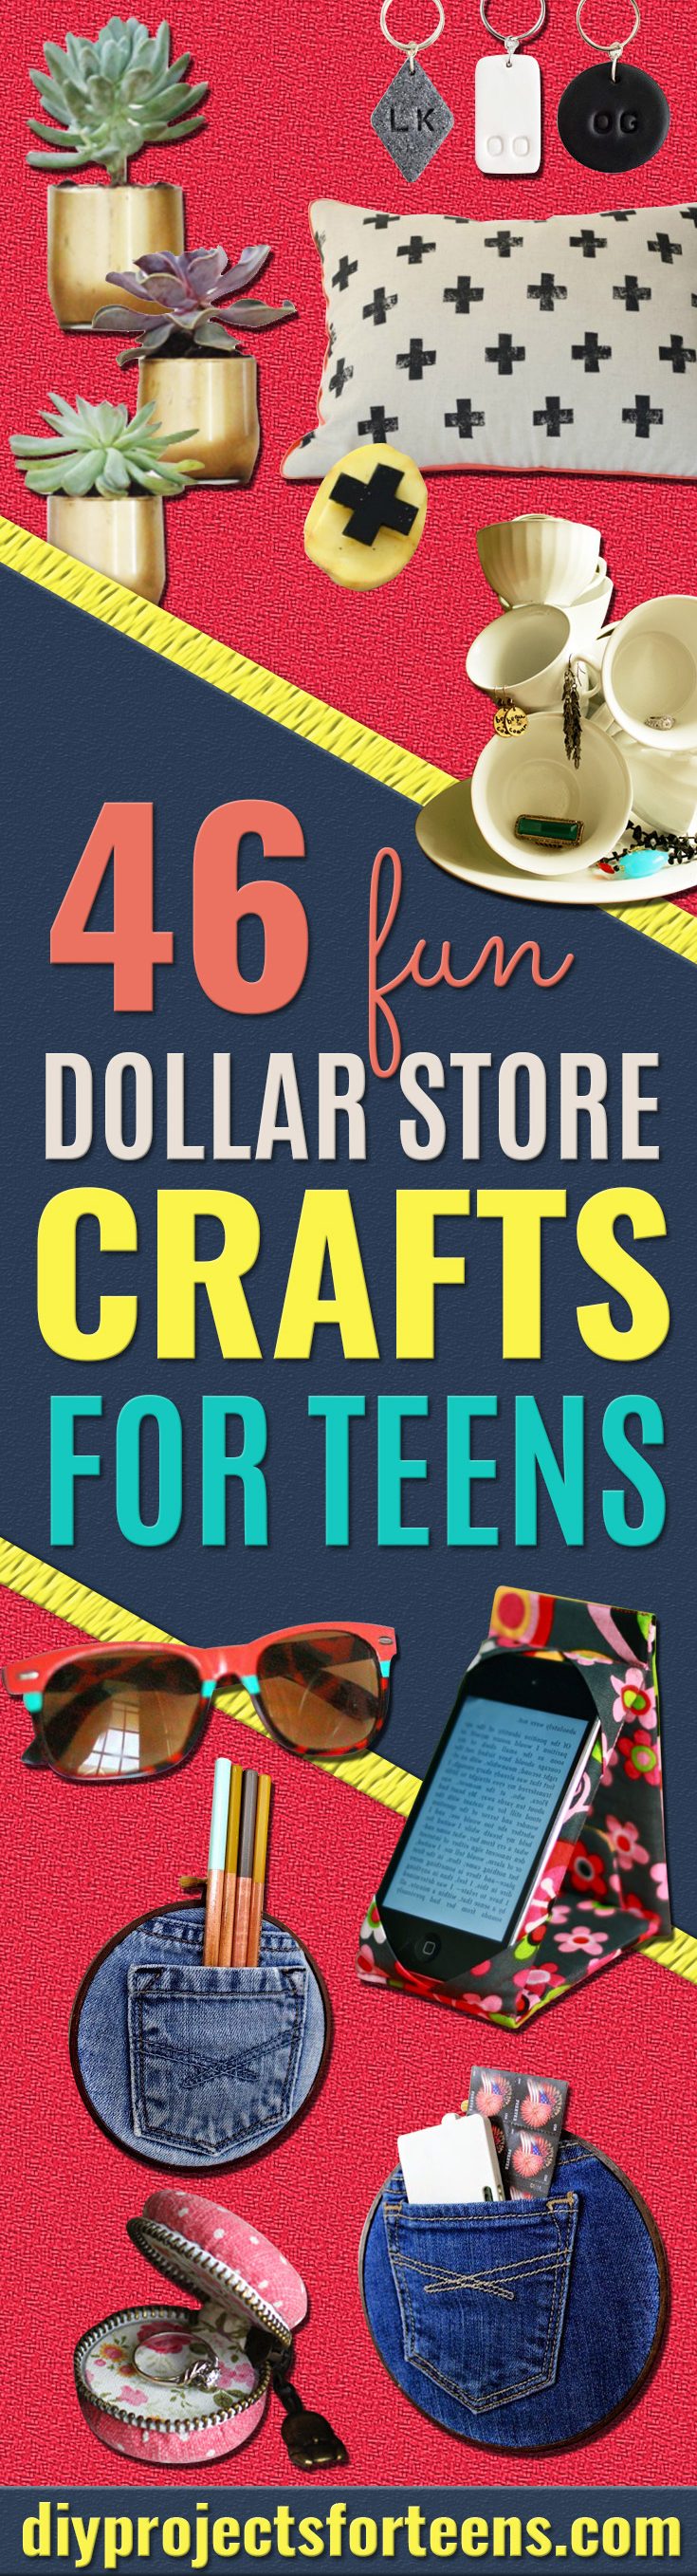 Fun Dollar Store Crafts for Teens